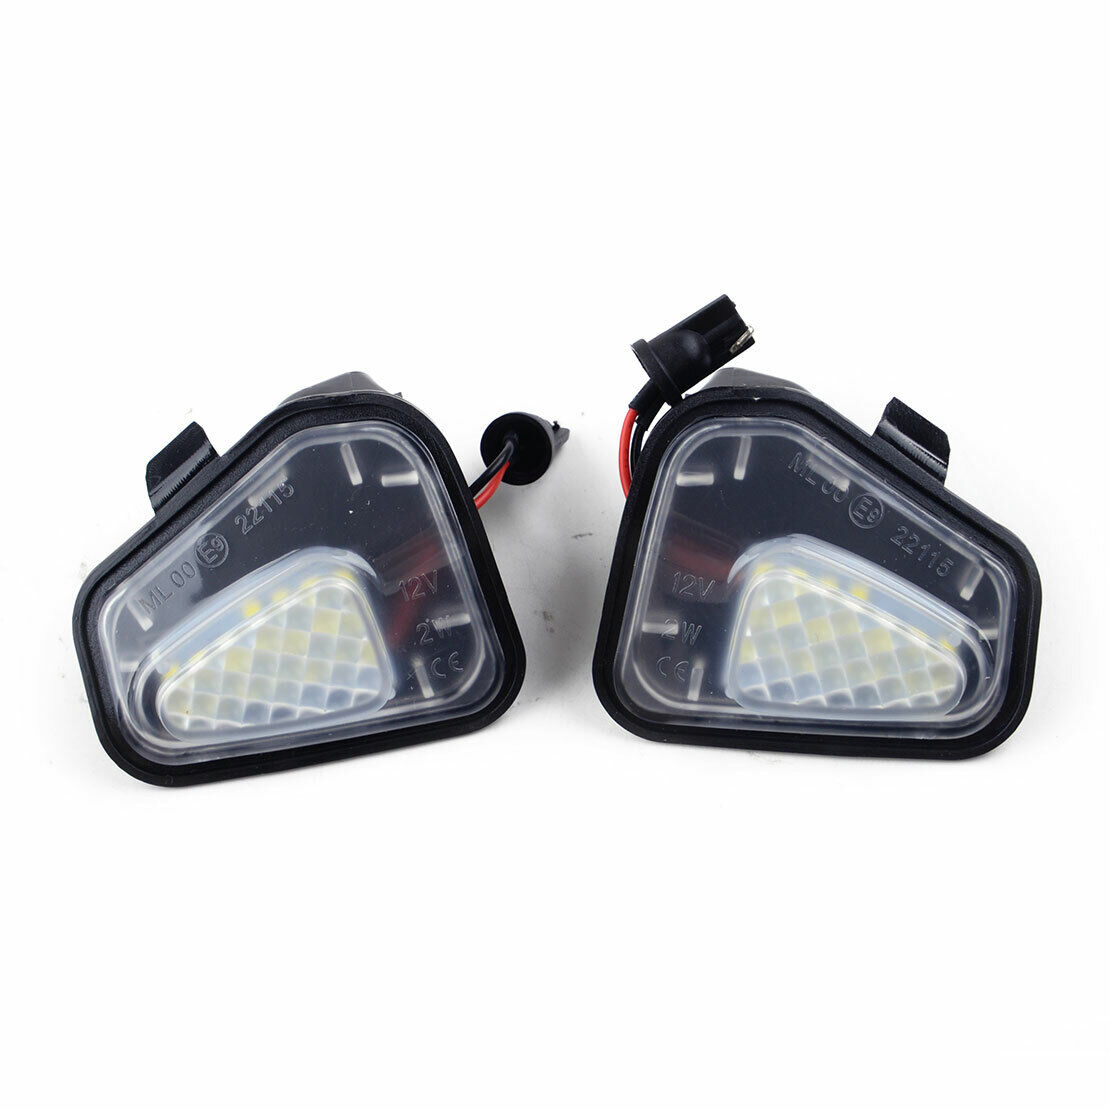 2x LED Side Mirror Puddle Light Lamp Fit For CC EOS Passat Scirocco Santana Yd